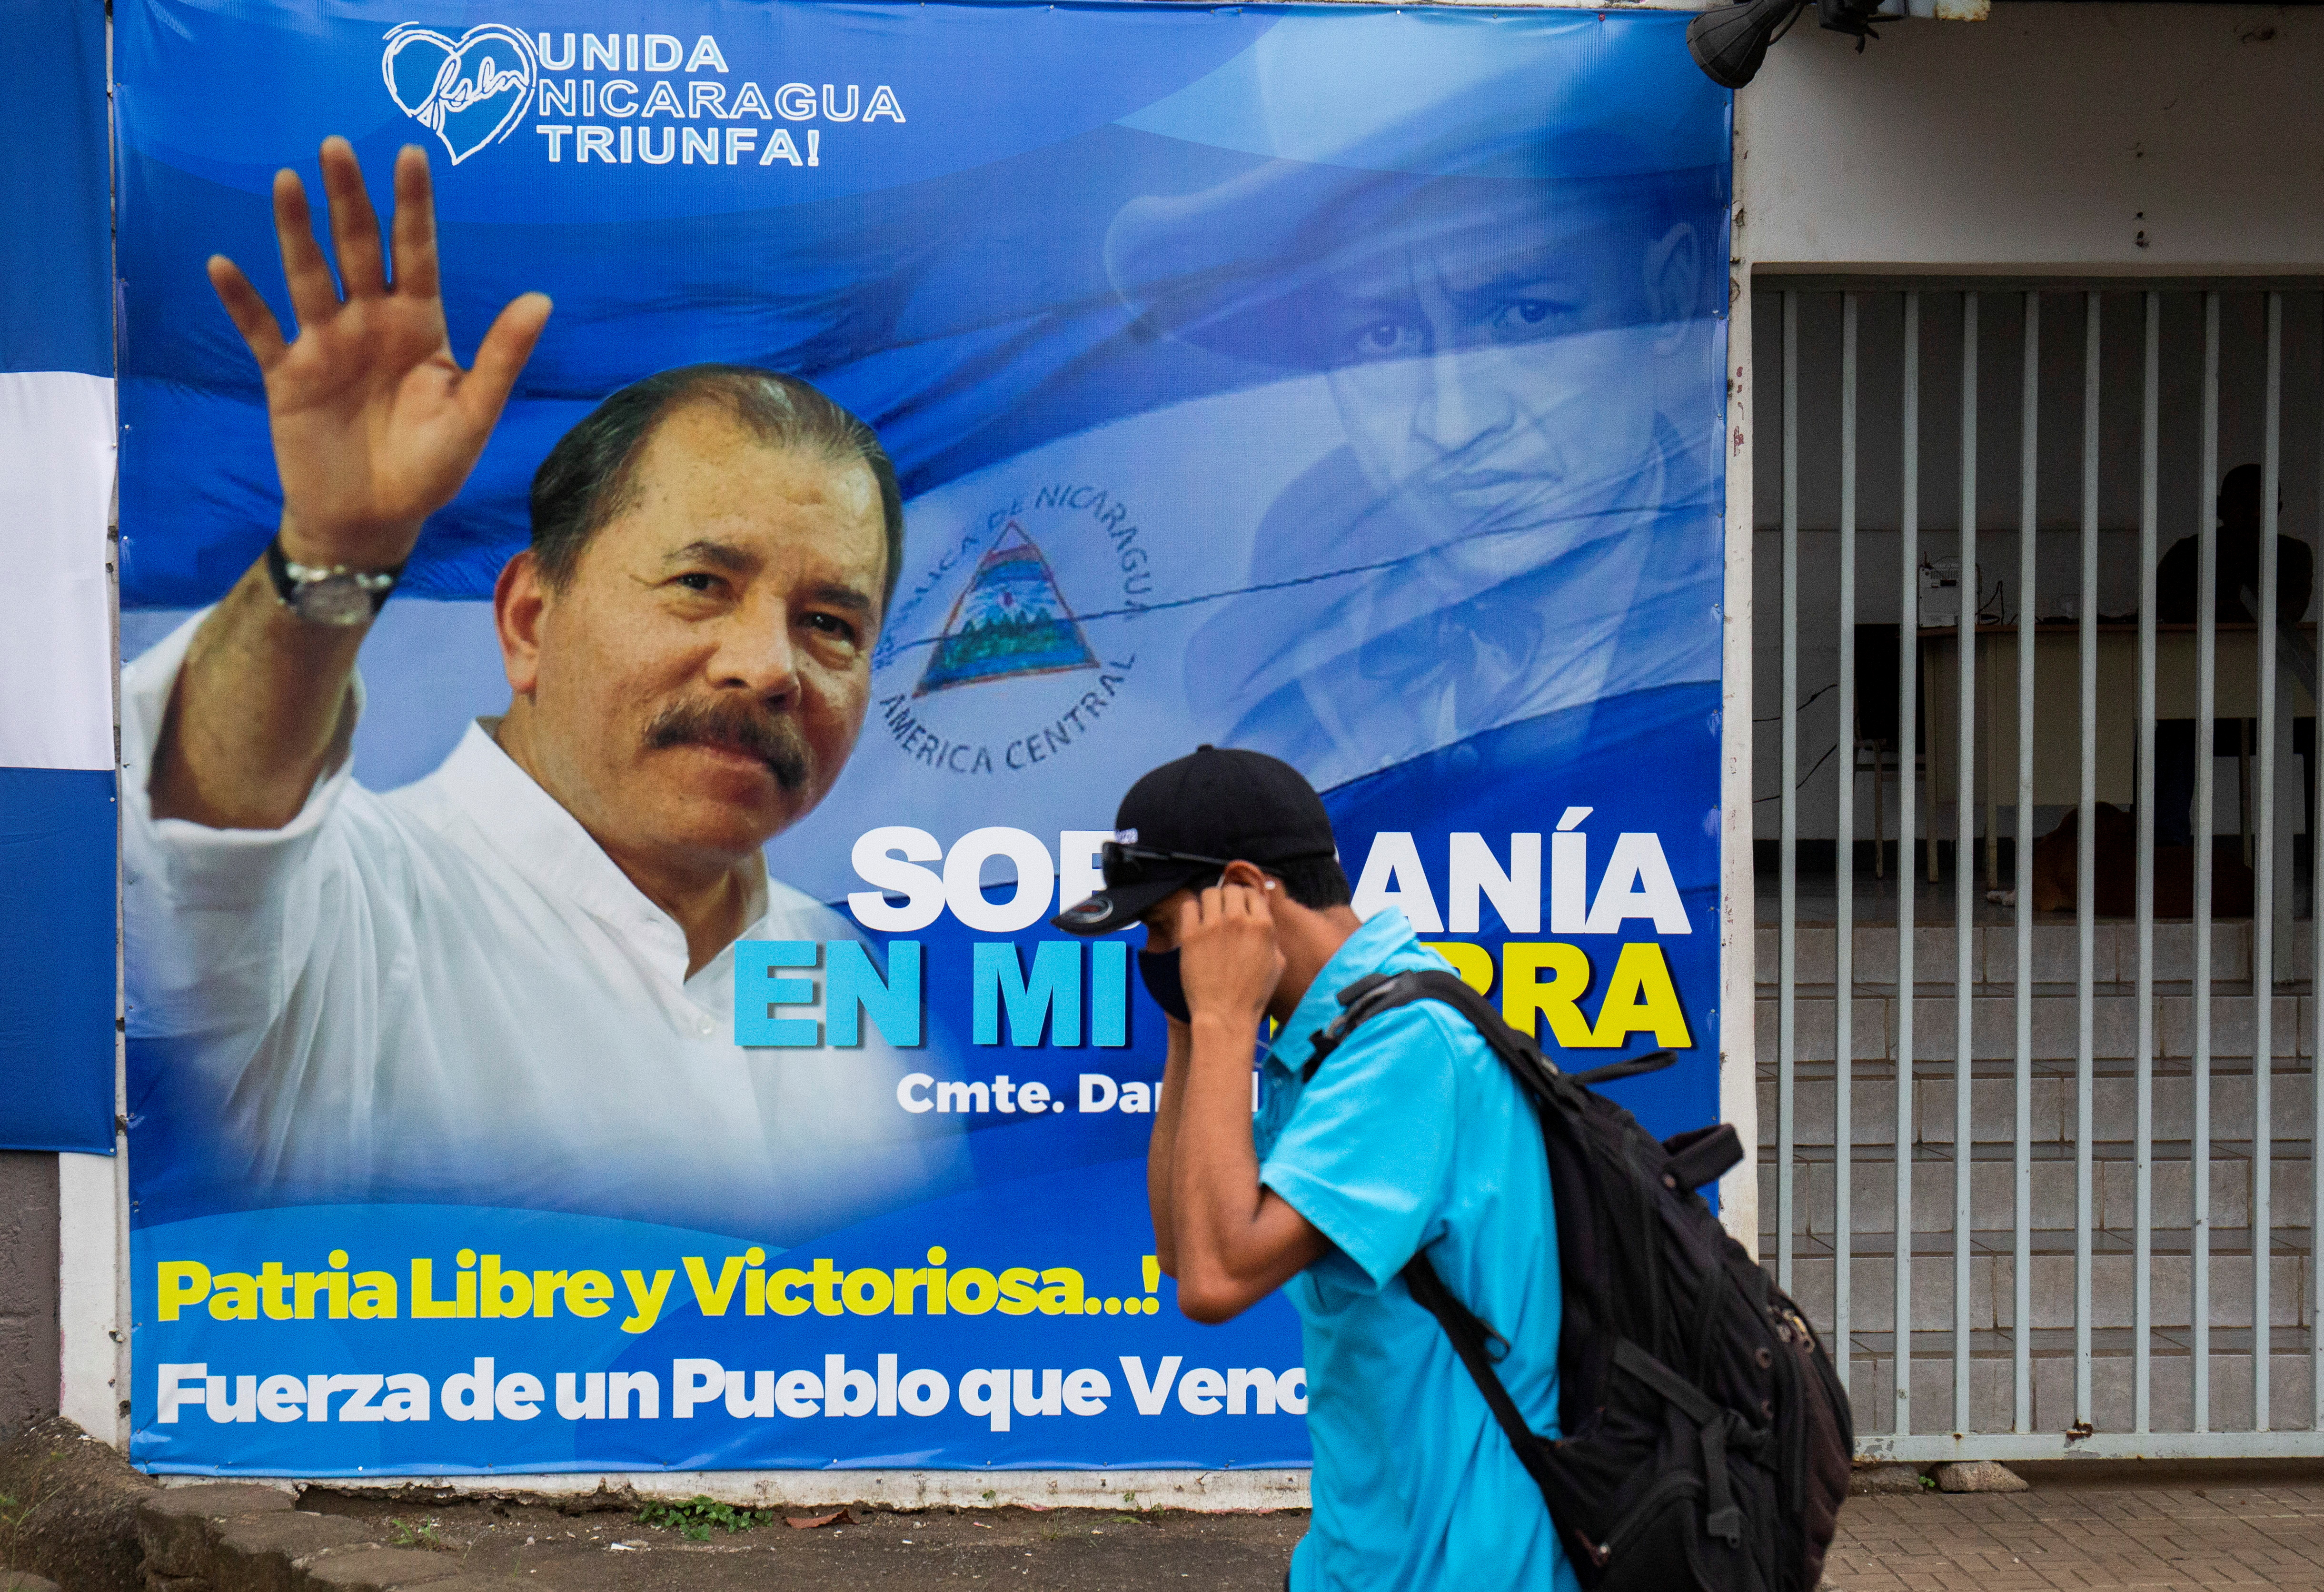 A man adjusts his face mask while walking by a banner promoting Nicaraguan President Daniel Ortega, as presidential election campaigns begin, in Managua, Nicaragua September 25, 2021. REUTERS/Maynor Valenzuela 